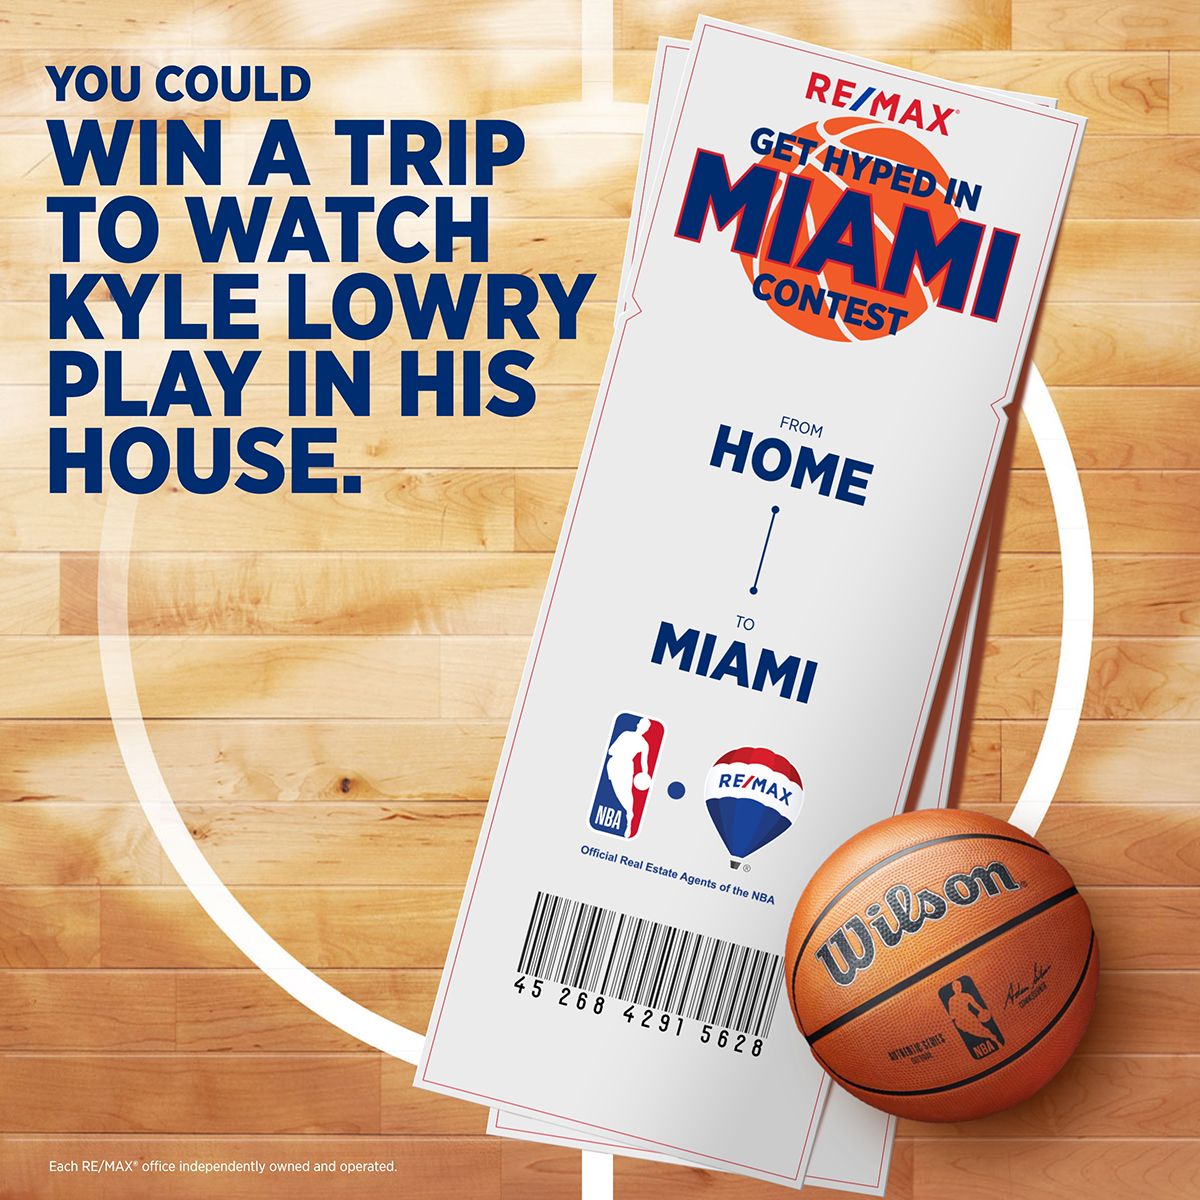 Enter to Win: RE/MAX Get Hyped in Miami Contest